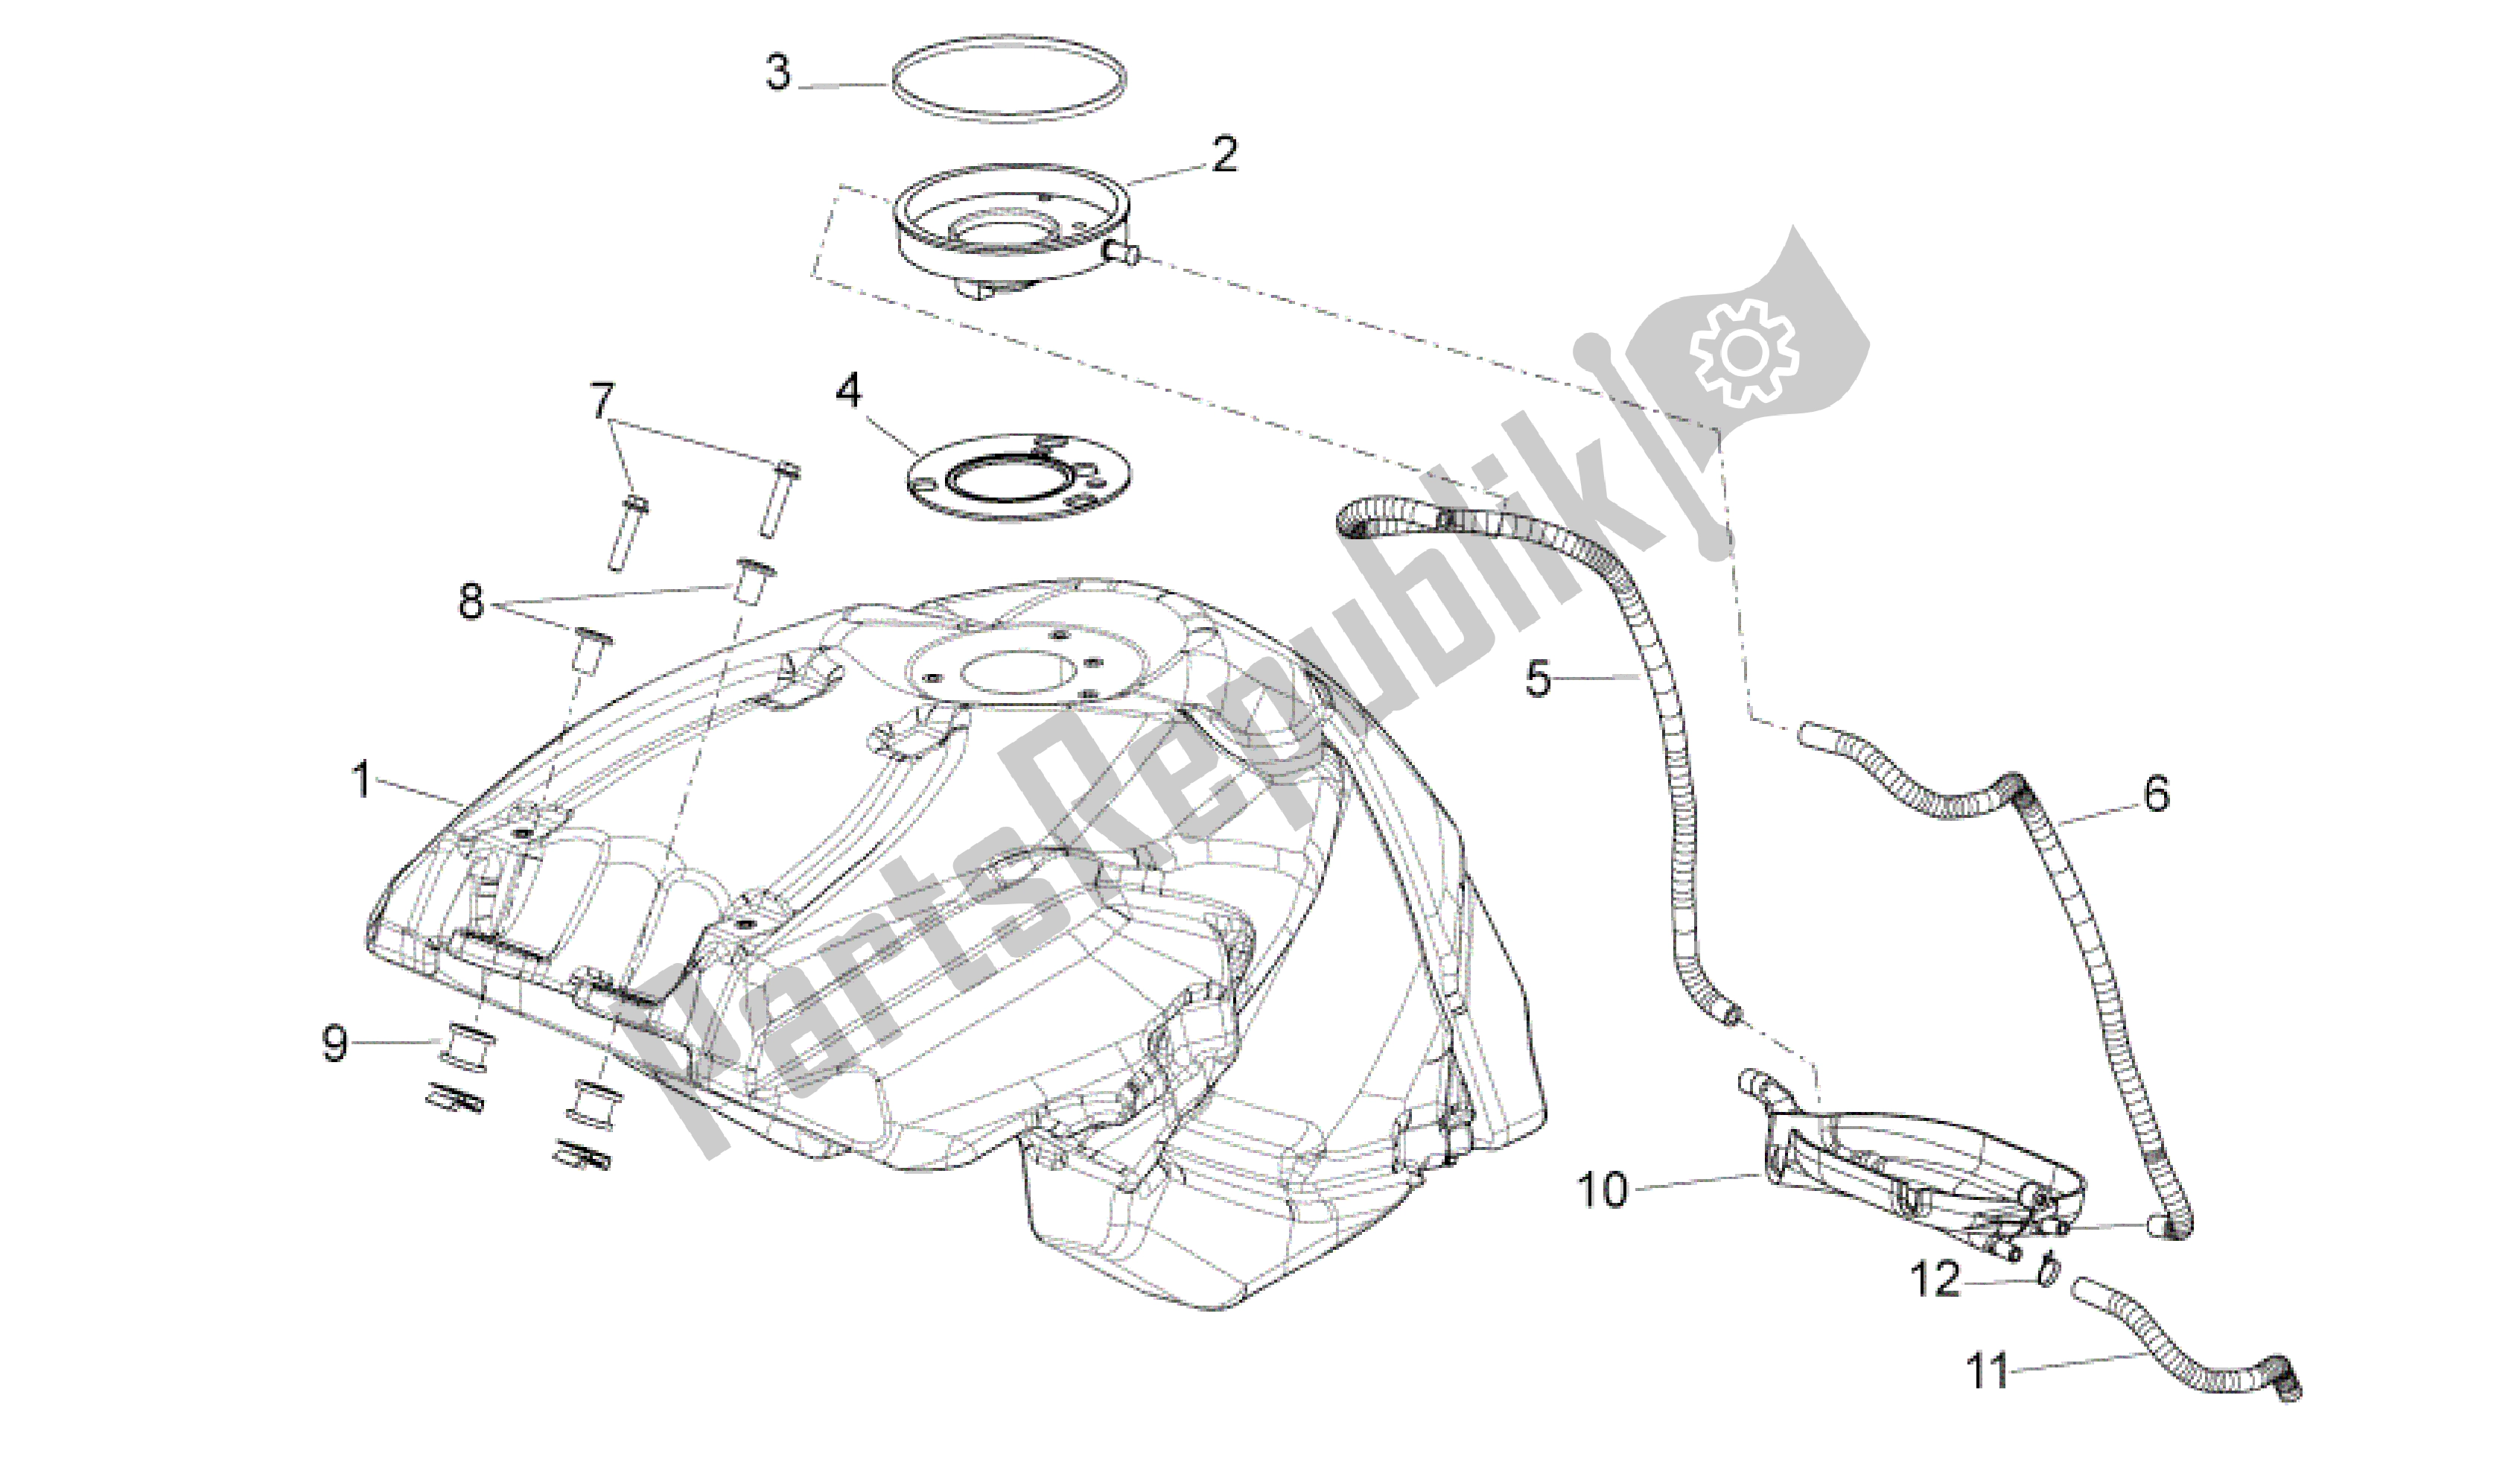 All parts for the Fuel Tank of the Aprilia Shiver 750 2011 - 2013